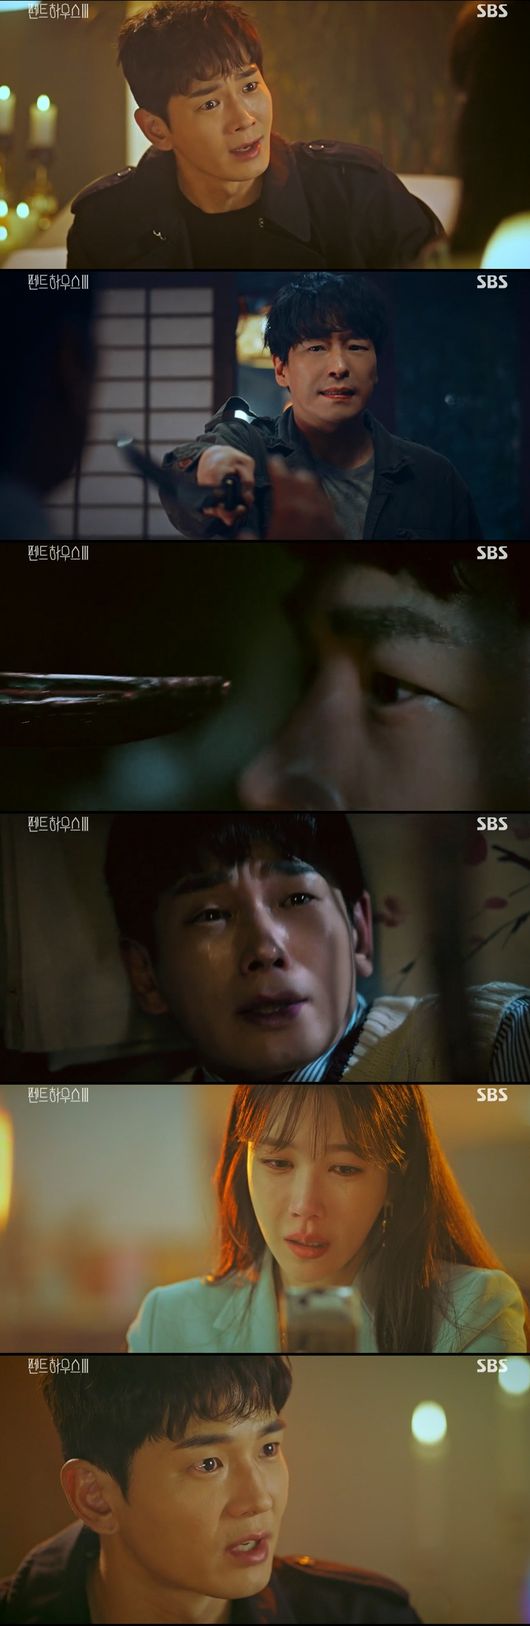 On Joo-wan reveals Um Ki-joons pastOn SBS Penthouse broadcast on the 18th, Baek Joon-ki (On Joo-wan) was shown to reveal the past of Um Ki-joon.Baek Jun-ki, who failed by the Lee Ji-ah while trying to kill the main stage, was angry, Who are you blocking my work?I am a heart trainee, he said. How much I found you, what were you doing when your Logan died?Joo said to Ju Tae-tae, Mr. Logans brother came to the house. What does Mom and Logan have to do with it?So, Ju Tae Tae told Joo Kyung, Please listen to my fathers request.I came to Korea believing in Logan only, but I was afraid of death, and I was worried that I would think I killed Logan, Baek said to Shim.My real name is Judantae, said Baek Jun-ki. Mr.Back was a person who had been at home since his father was in business.When my house moved to Japan, Mr.Back came to my house in the middle of the night. Baek Jun-ki, who is now called the mainstay, Killed all the parents of the real mainstay, and the real mainstay witnessed this.The real master stash was urgently hidden and Mr.Back threatened to tell the real master stash to tell the house Safe password.Eventually, the real Judantae talked about the password and Mr.Back took all the money and ran away.How can you do such a scary thing? said Baek Jun-ki. It was a mental hospital closing ward when I opened my eyes, he said. People thought Baek Jun-ki was dead.But he changed his name. My name is Judantae. He said, When I married him, he was perfectly in the mood.I said I left Japan Tokyo University and there were guests from Japan. I will kill him with my hand, he said. I will pin down the past of Baek Jun-ki so that I can not undo it again.He dressed up as an old man, but his demonic eyes are definitely Baek Jun-ki. He killed Logan. I saw him.I didnt do anything, I thought he was going to kill me, Baek said. Then he handed me the ring that Logan found at the scene of his death.Its the ring Logan was trying to give you, and he seemed to like you a lot, and I was so excited about proposing all the way back, Baek said.